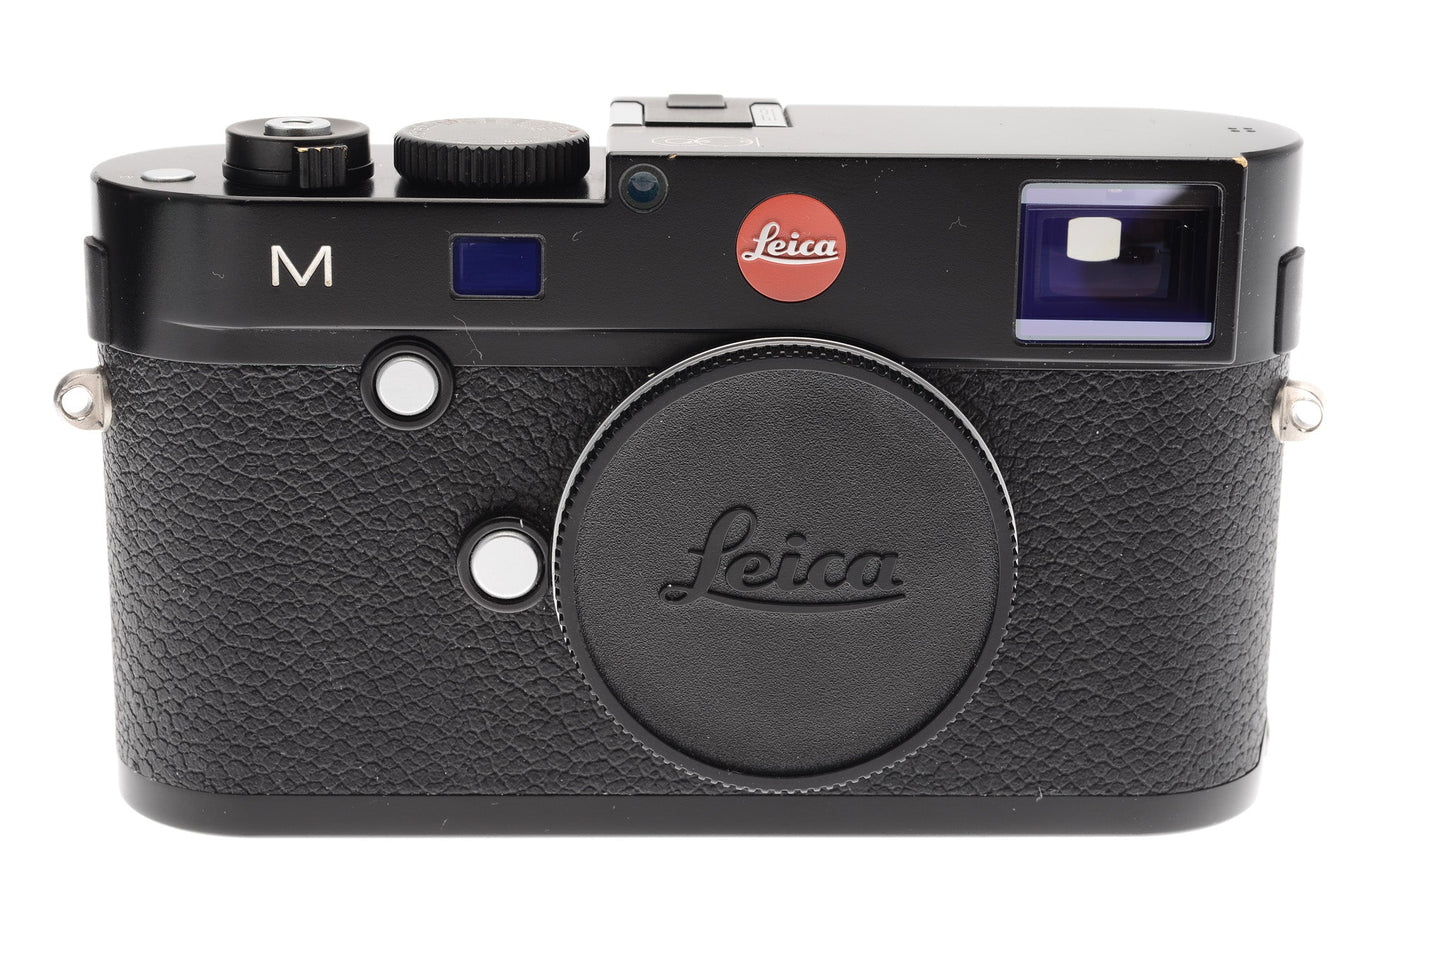 Leica M (Typ 240) 100 Years Anniversary Limited Edition - Camera